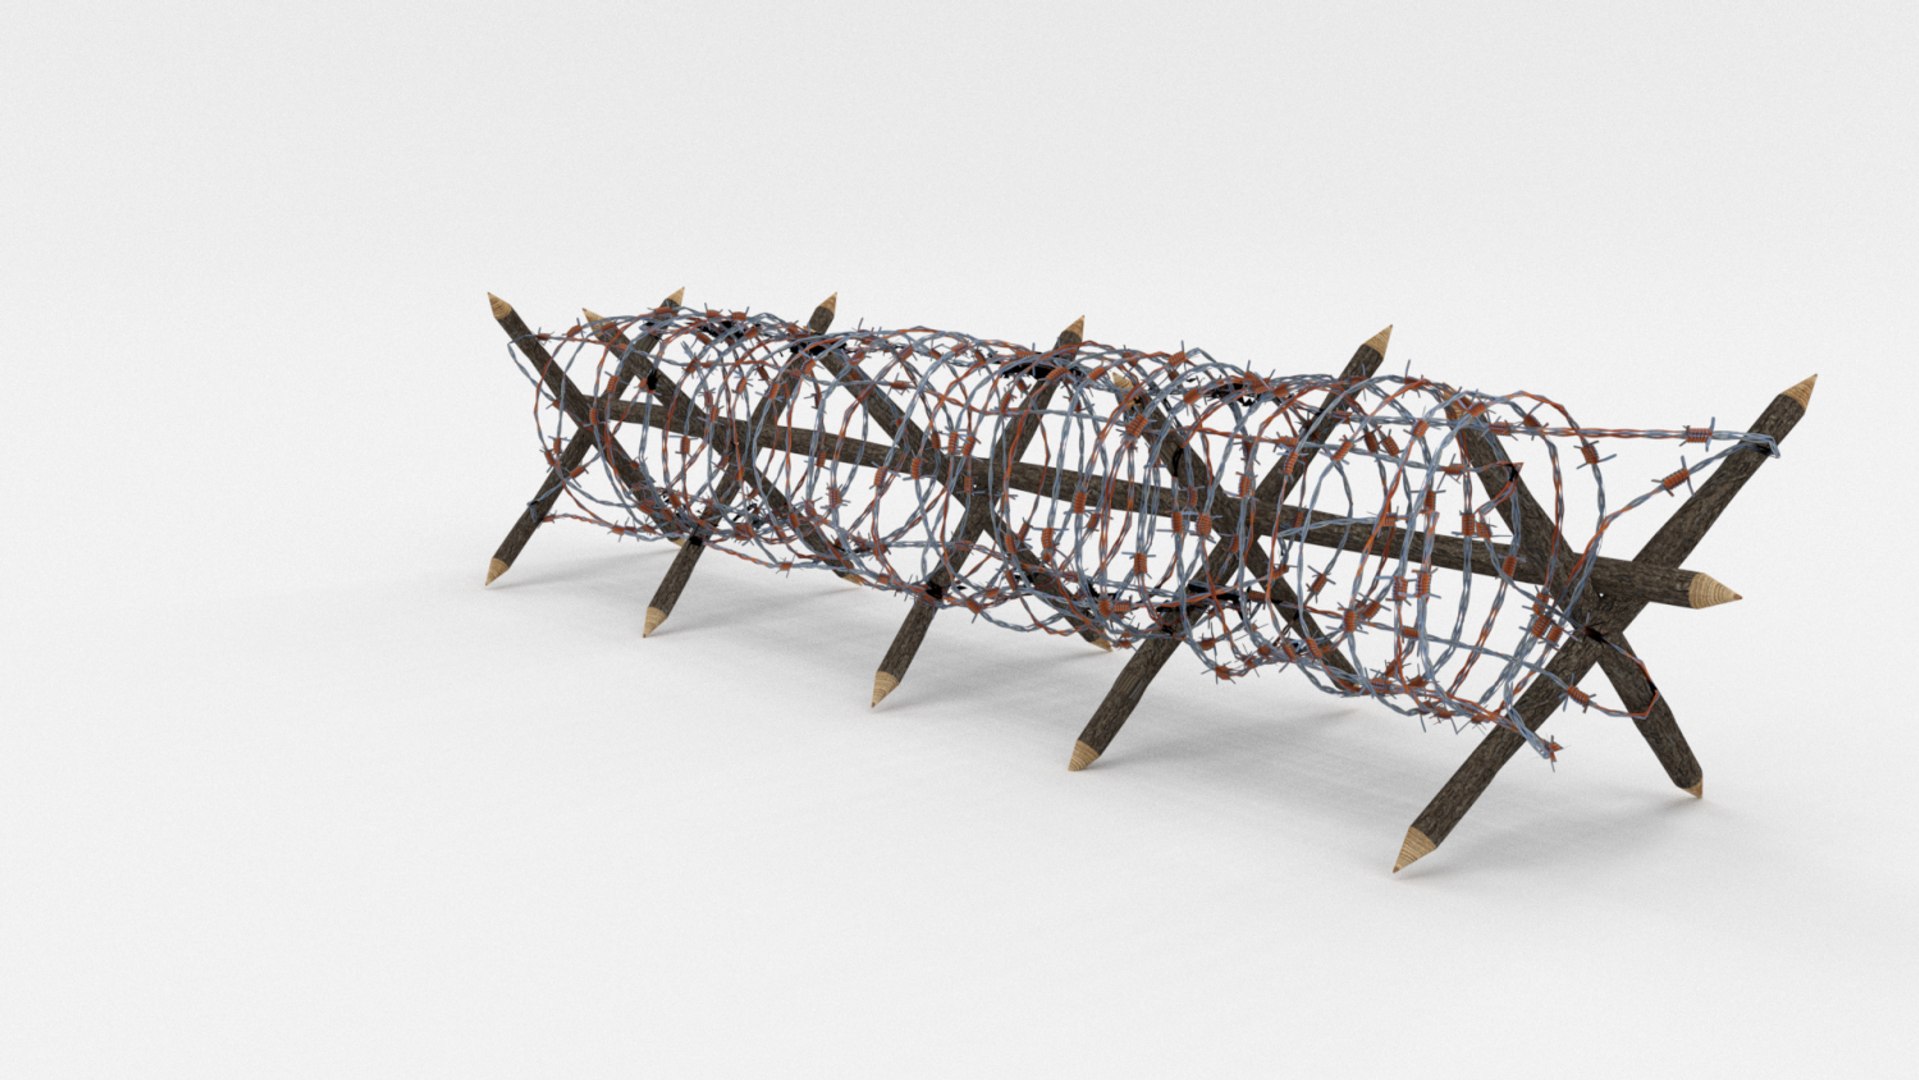 Barbed Wire Obstacle 3D Model - TurboSquid 1191703